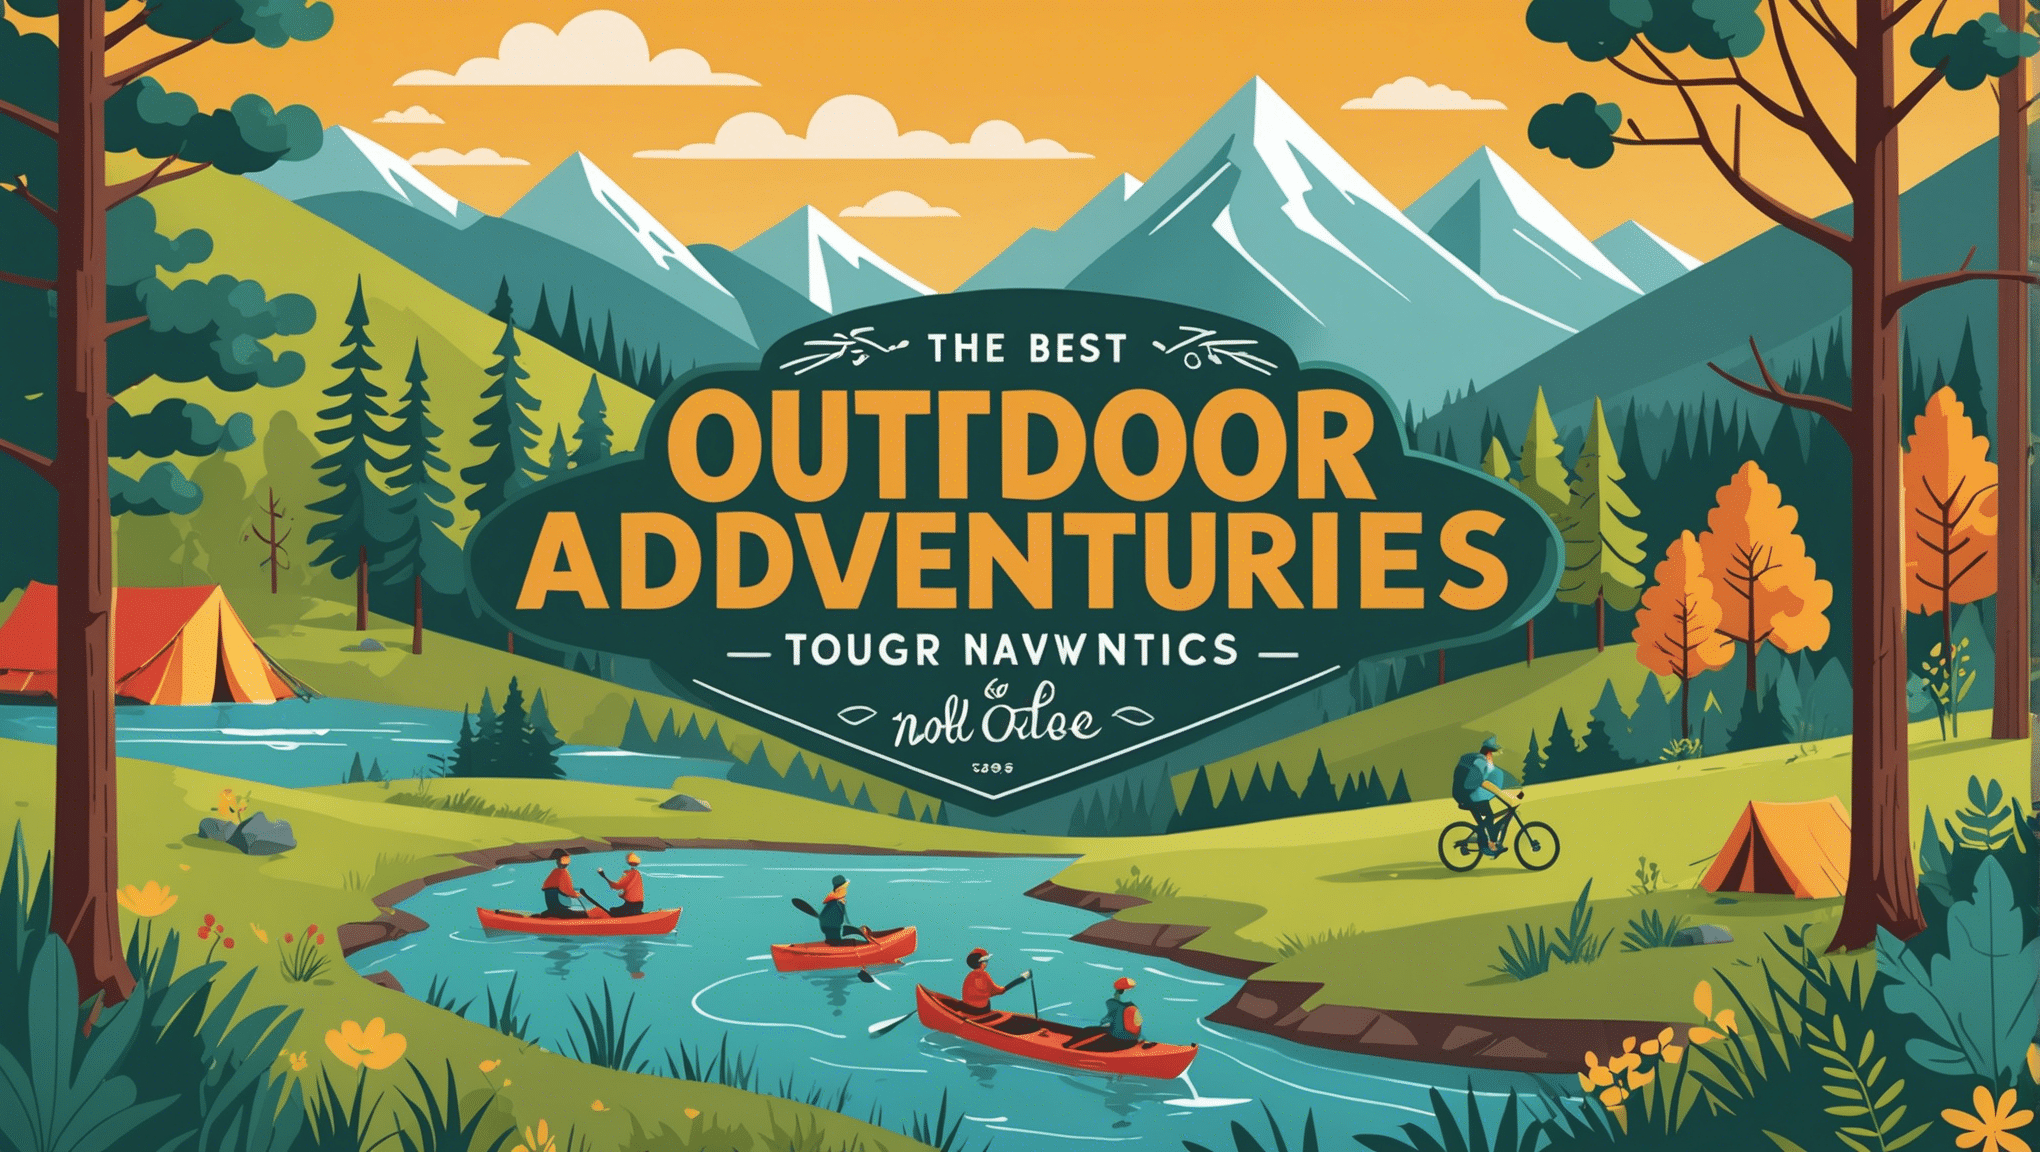 discover the best outdoor activities for nature lovers and go on an adventure in the great outdoors.